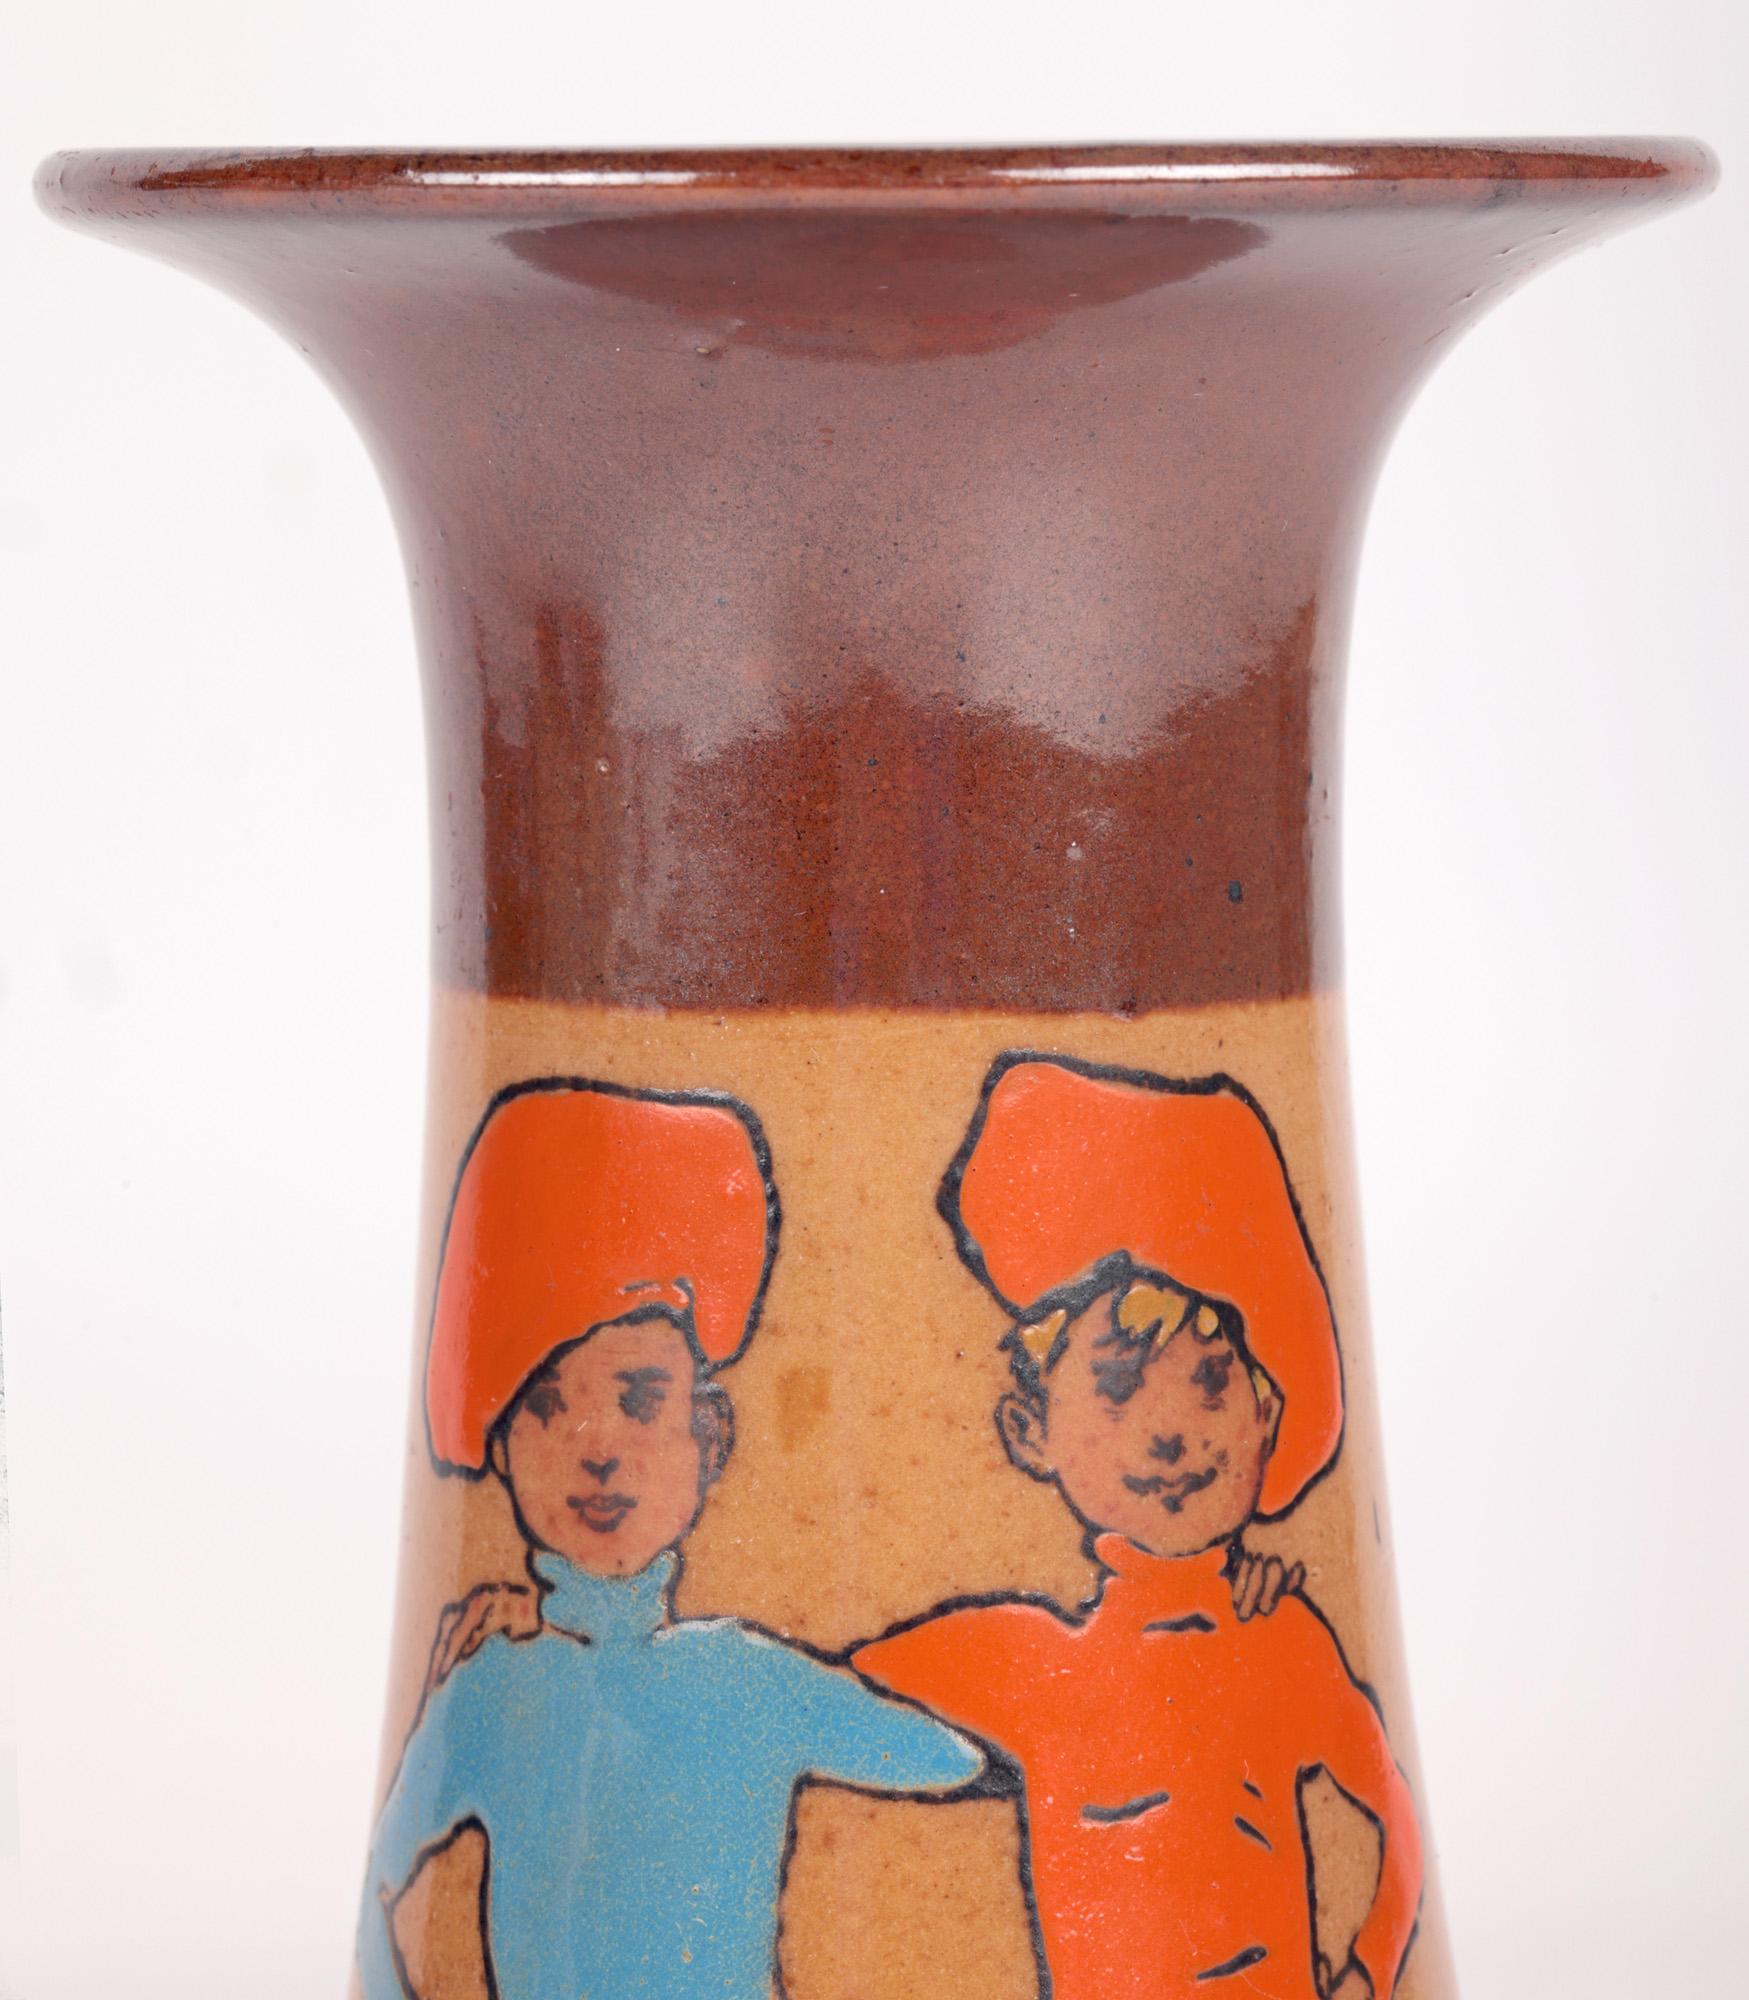 A delightful and sought after Doulton Lambeth Twins Ware vase painted with twin boys by renowned artist and illustrator John Hassall (British, 1868-1948) and dating from around 1905. The stoneware vase stands raised on a ring shaped foot with an